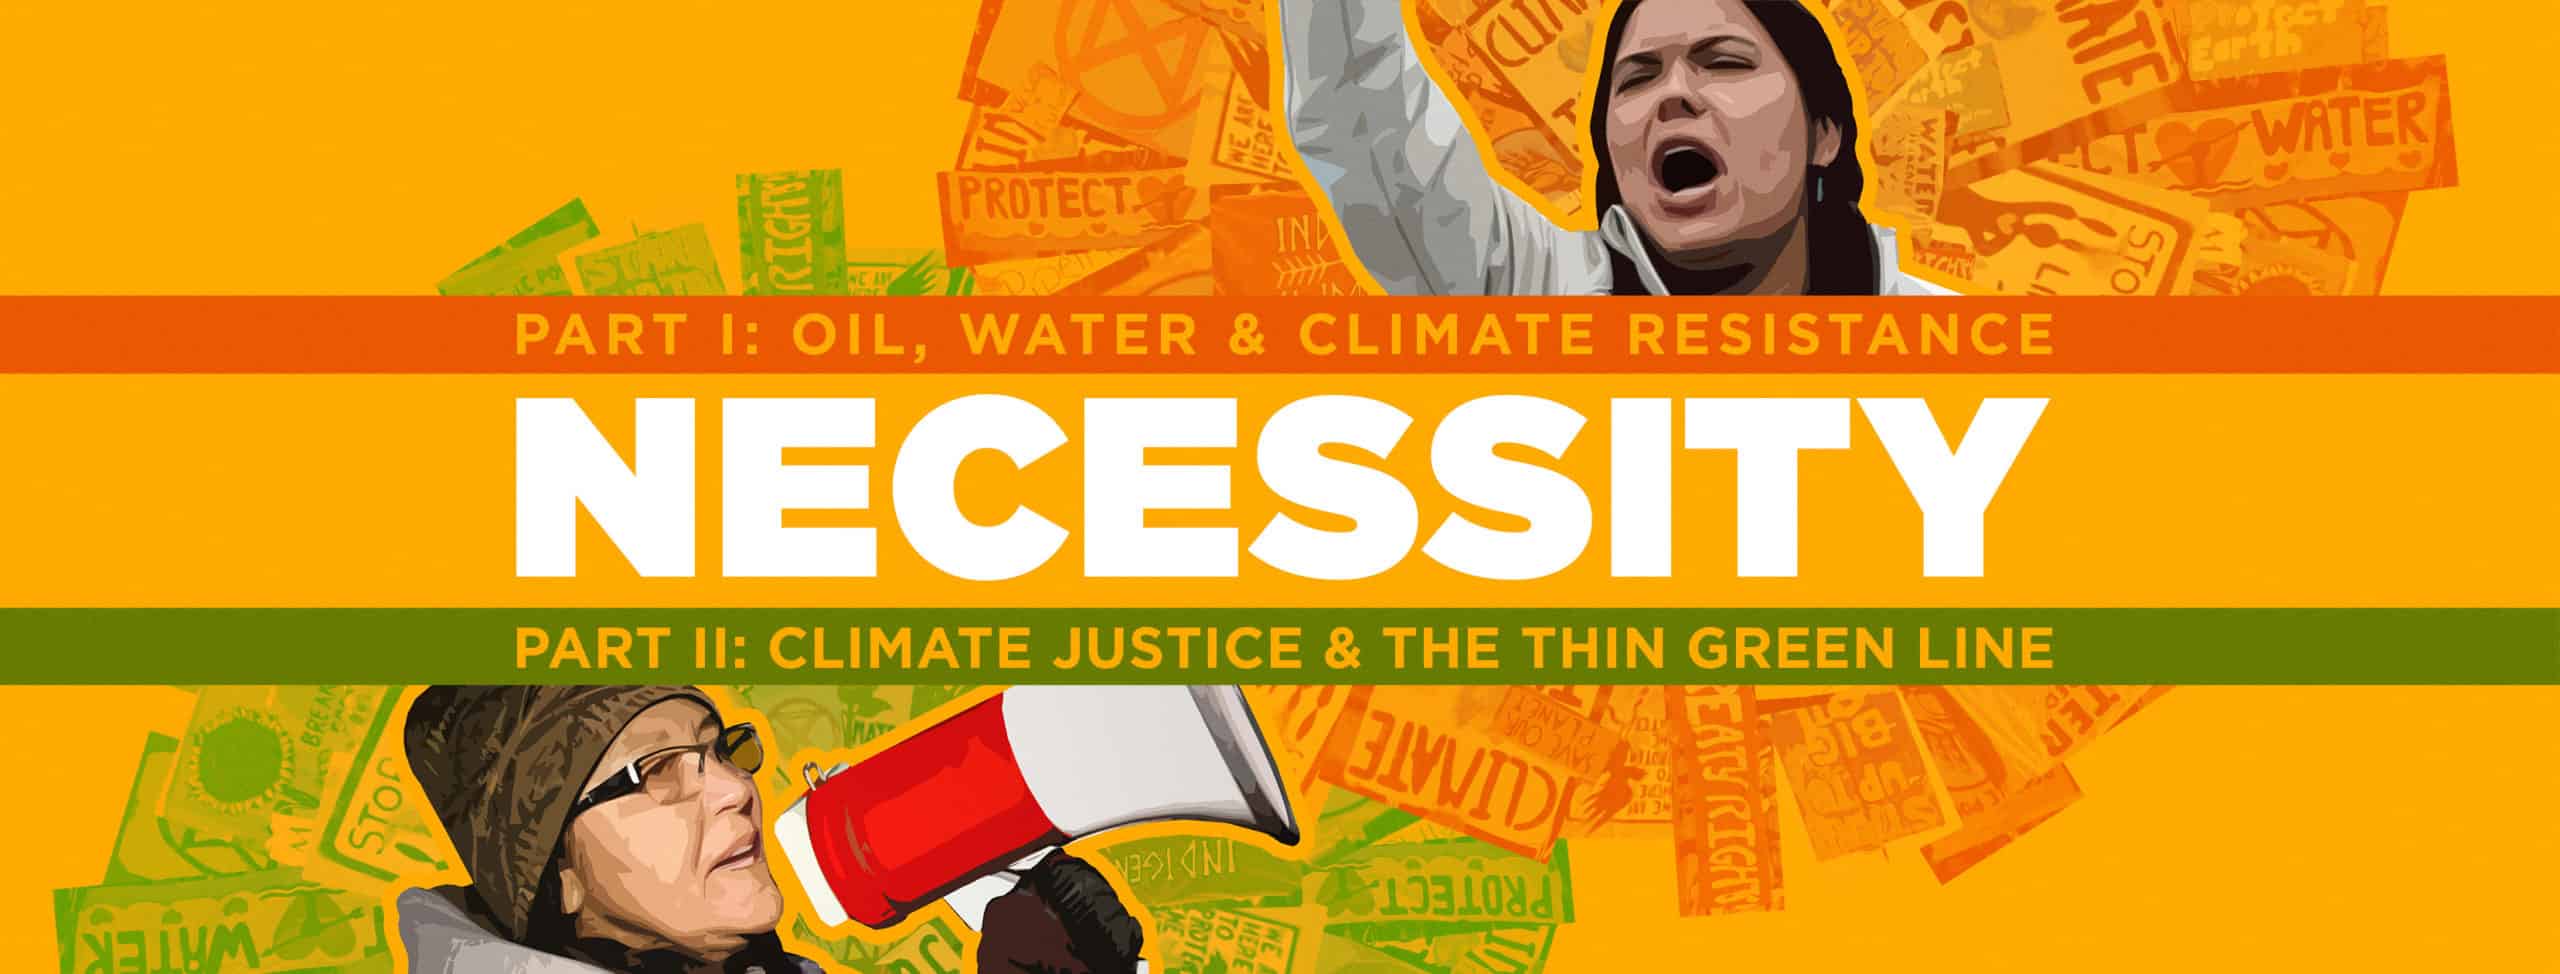 Necessity: A Two-Part Documentary on Environmental Resistance and Justice 19